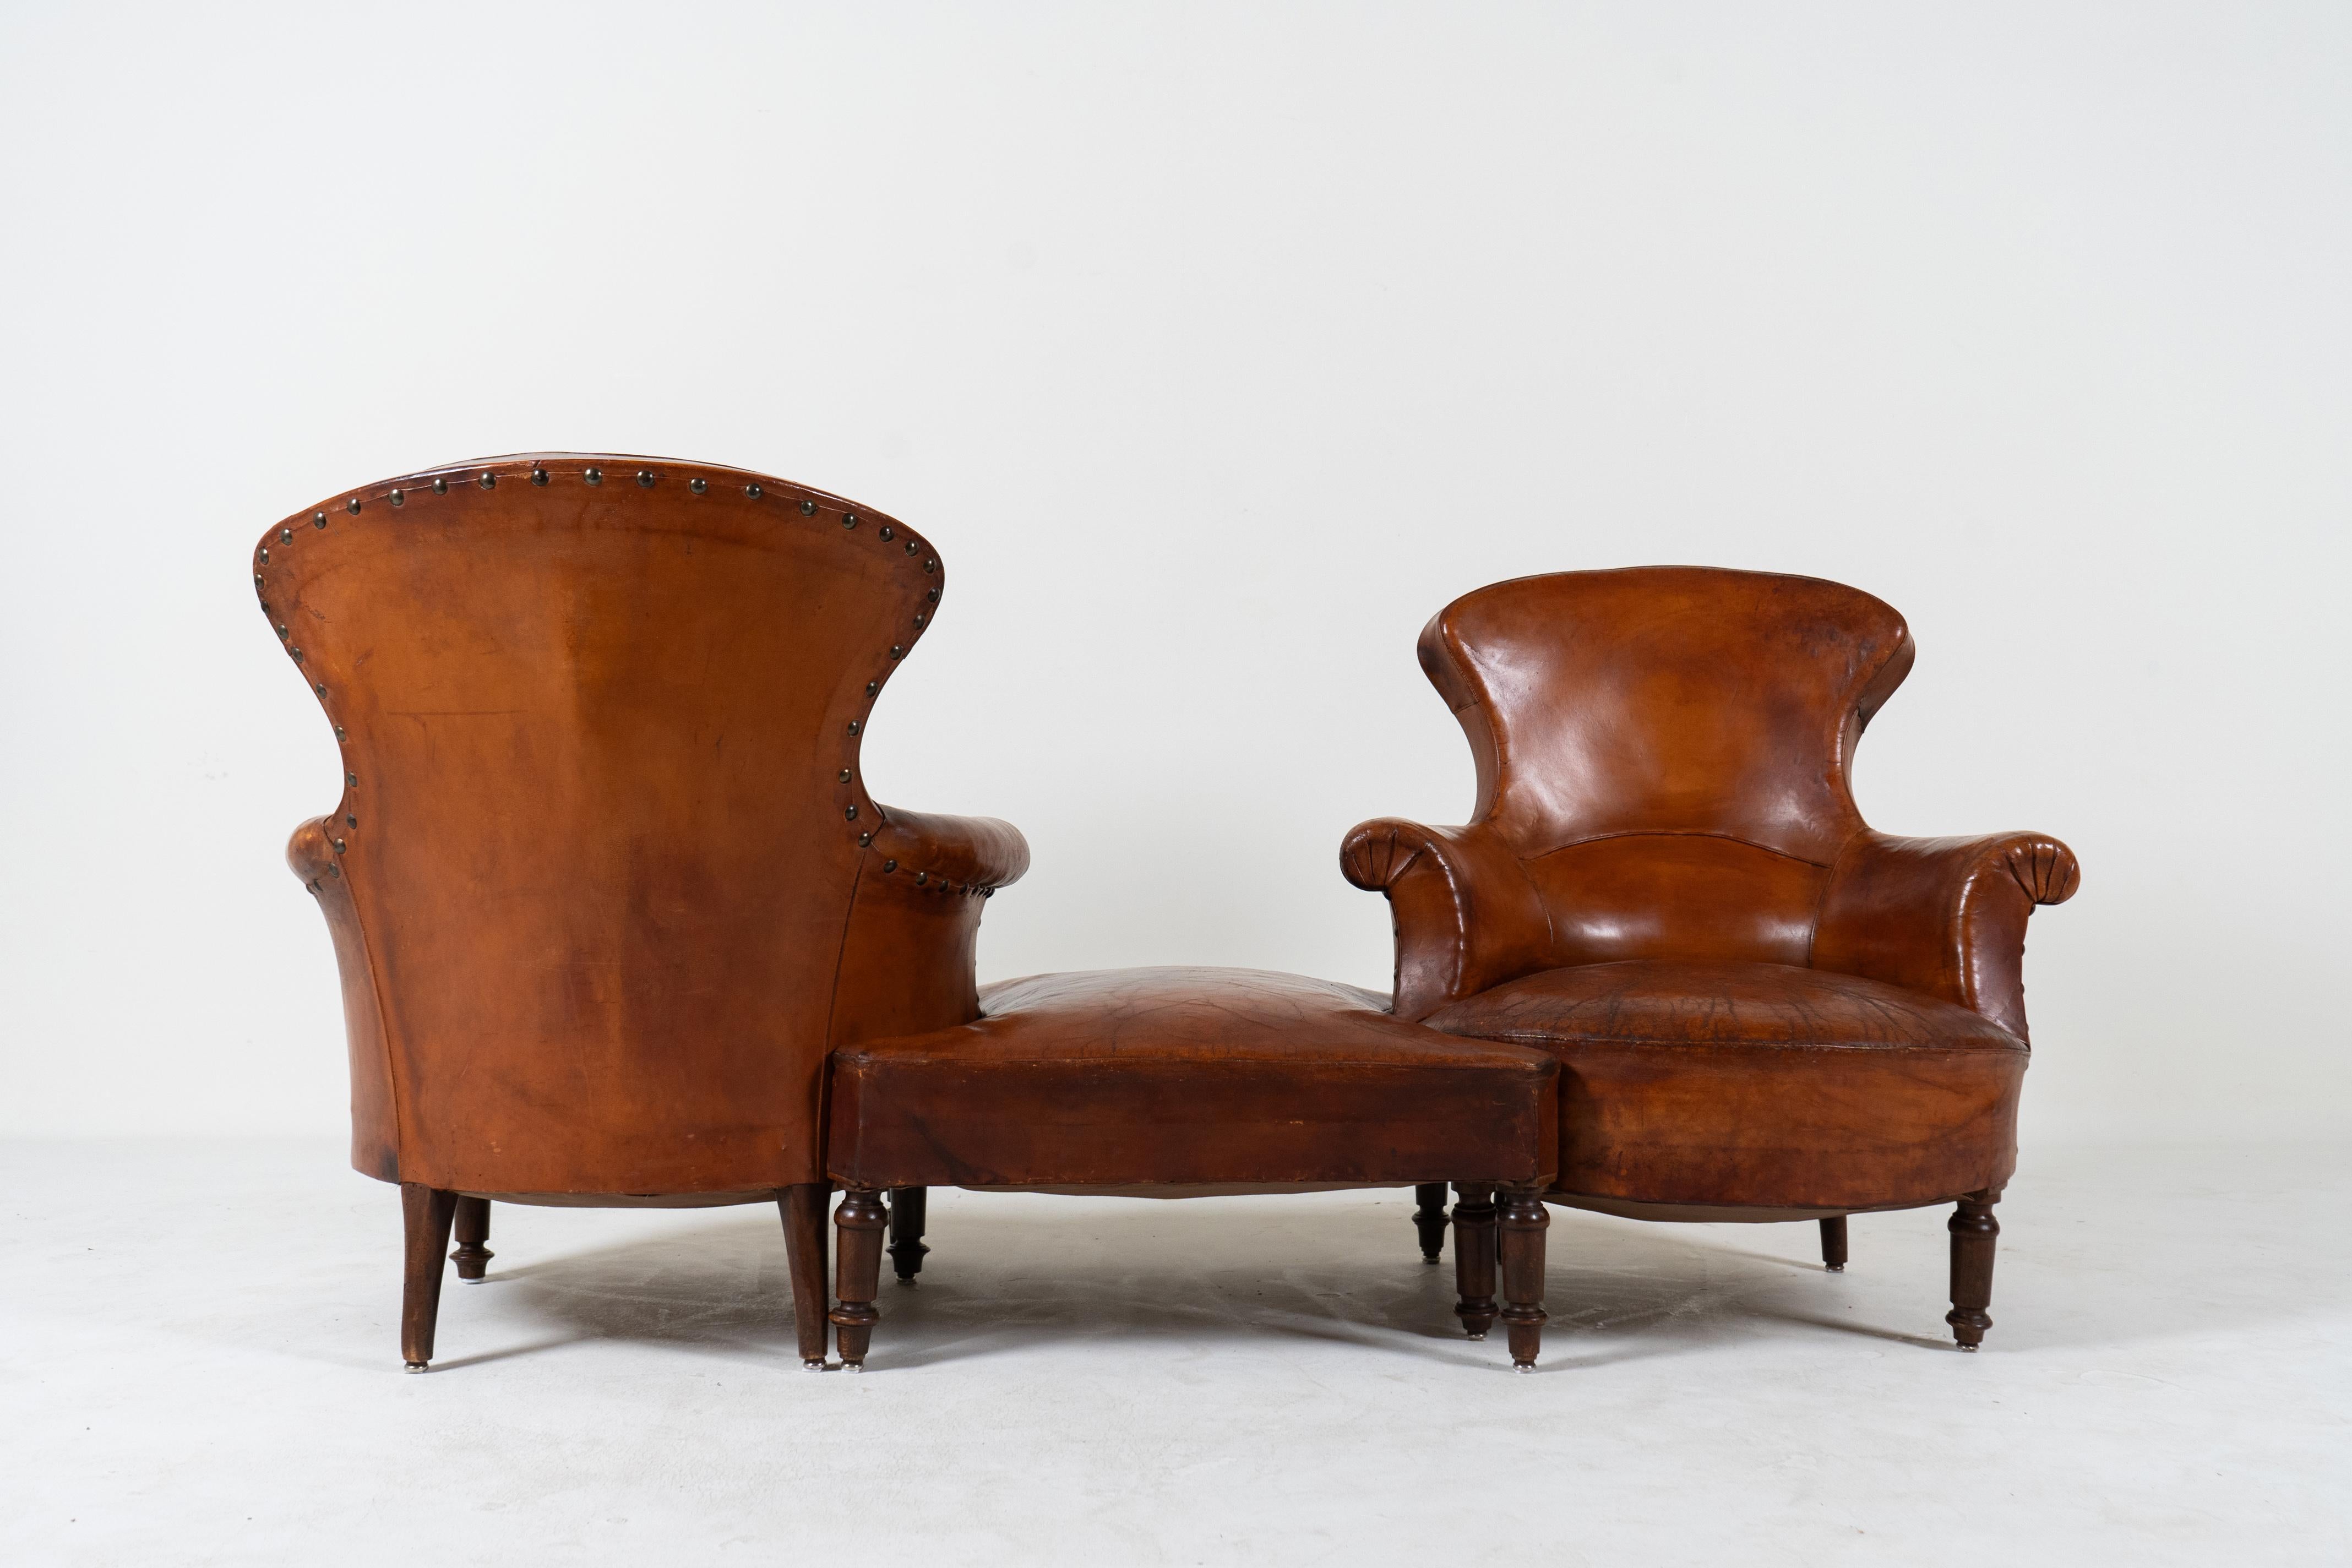 A Vintage 3 Piece Set of Leather Chairs with a Stool, France c.1940 1